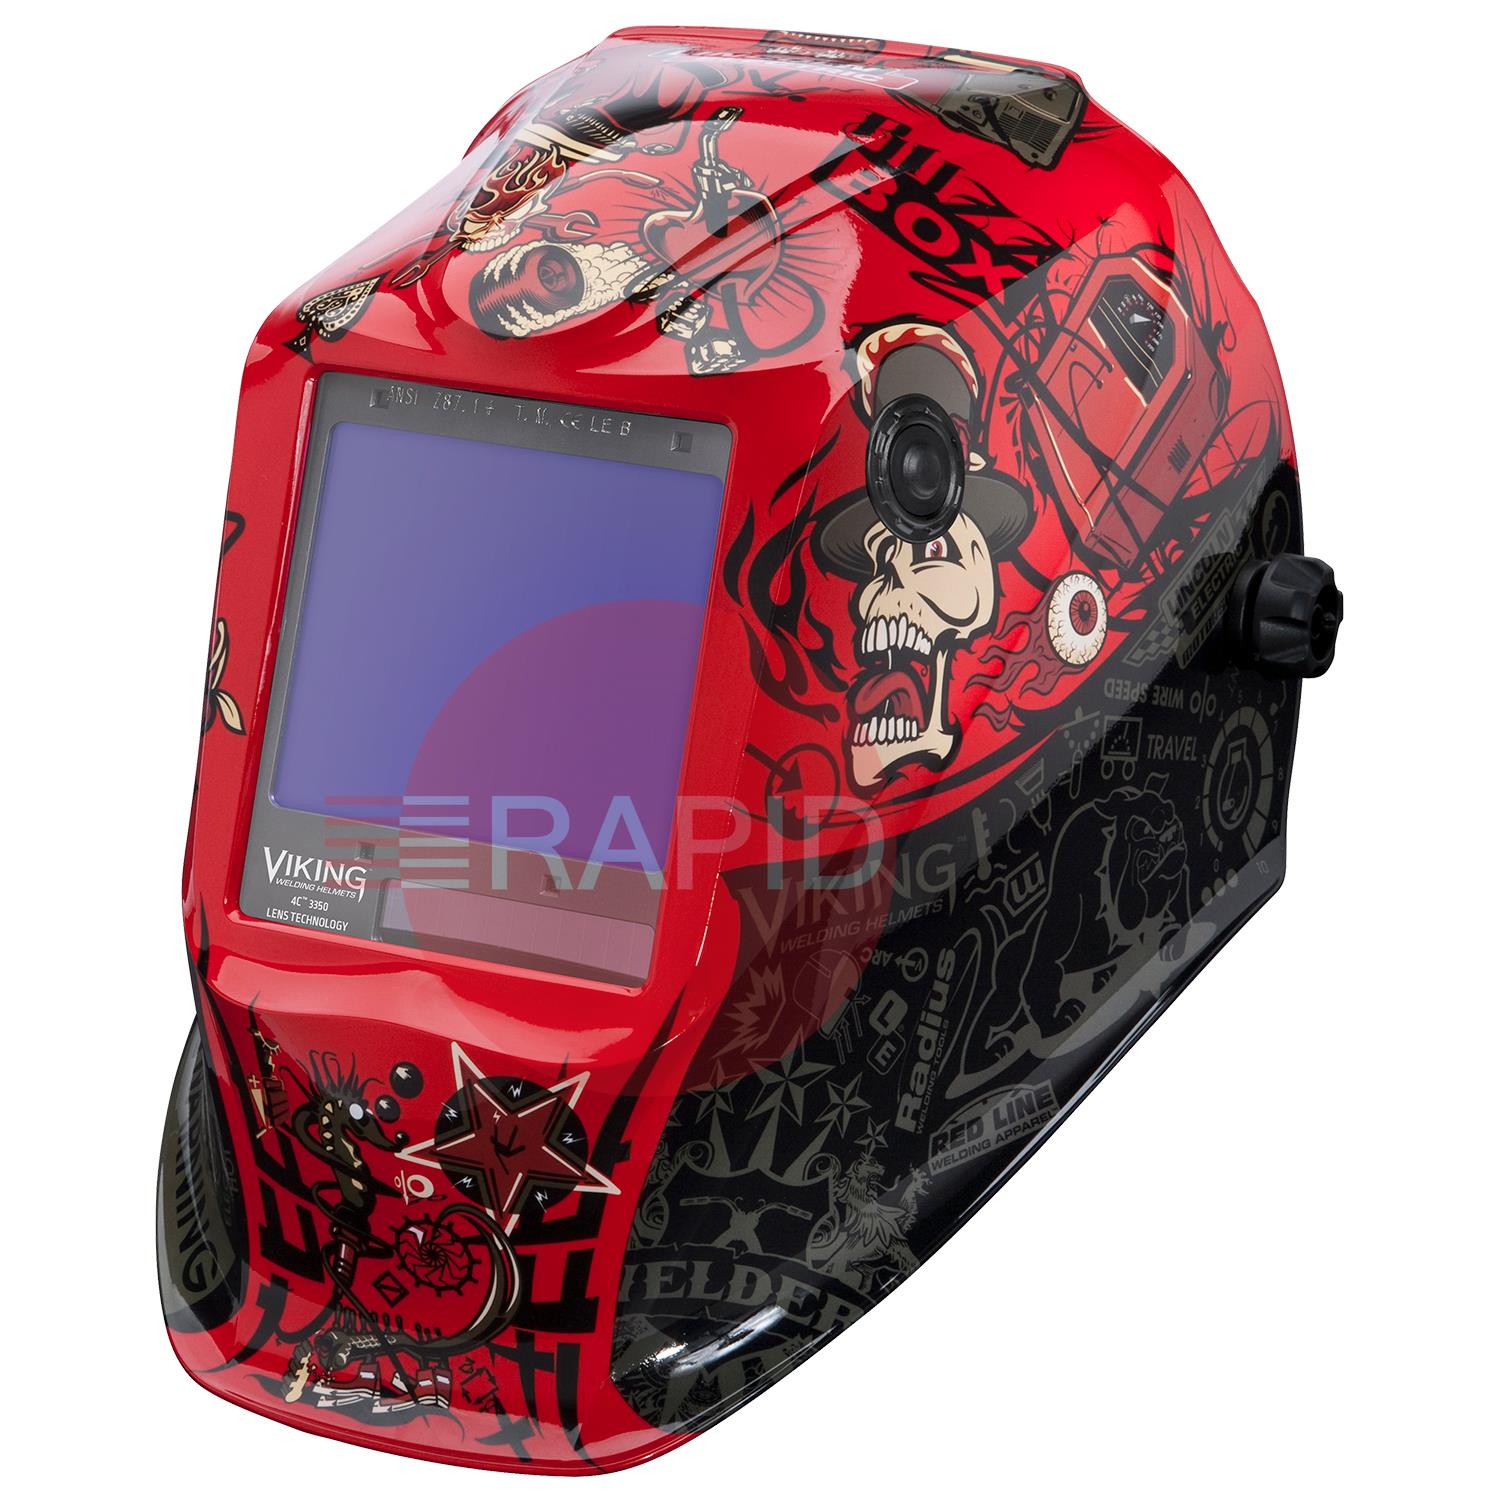 K3101-4-CE  Lincoln Viking 3350 Mojo Auto Darkening Welding Helmet, with Grind Button - Shade 5-13, Class 1/1/1/1